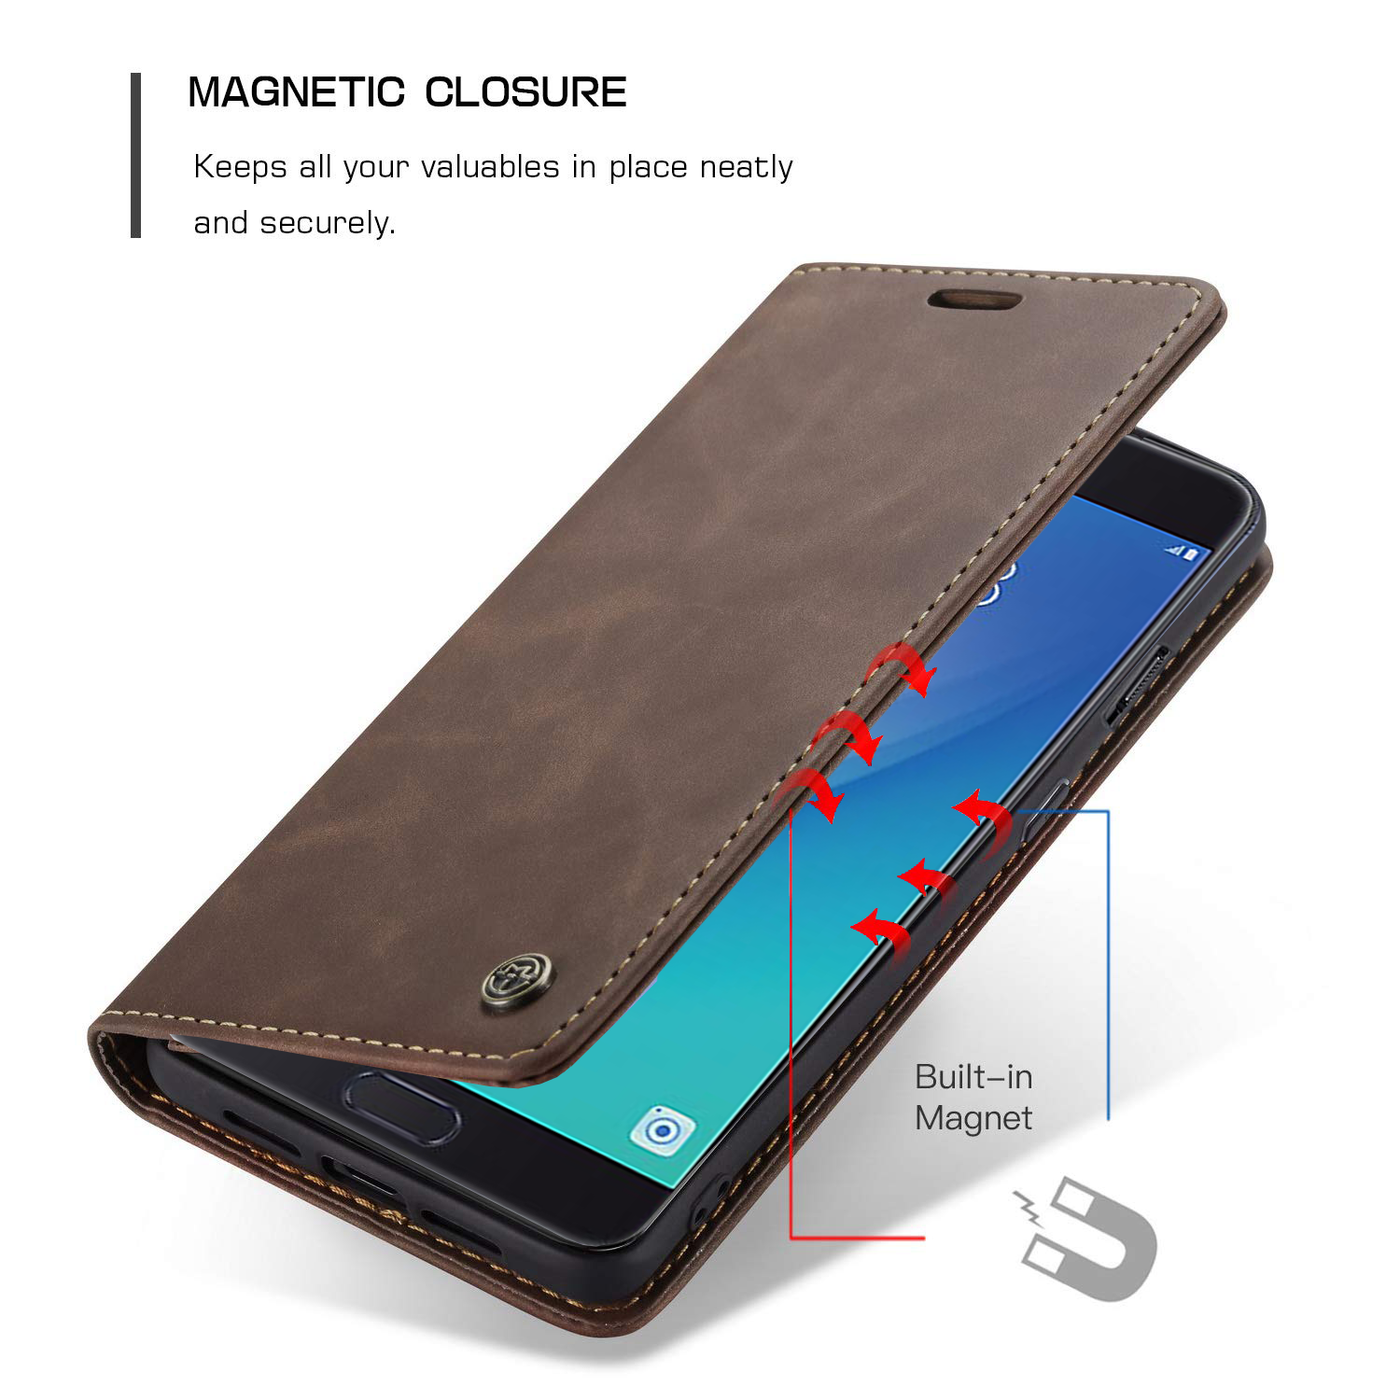 Samsung Galaxy C7 Pro Magnetic flip Wallet cover